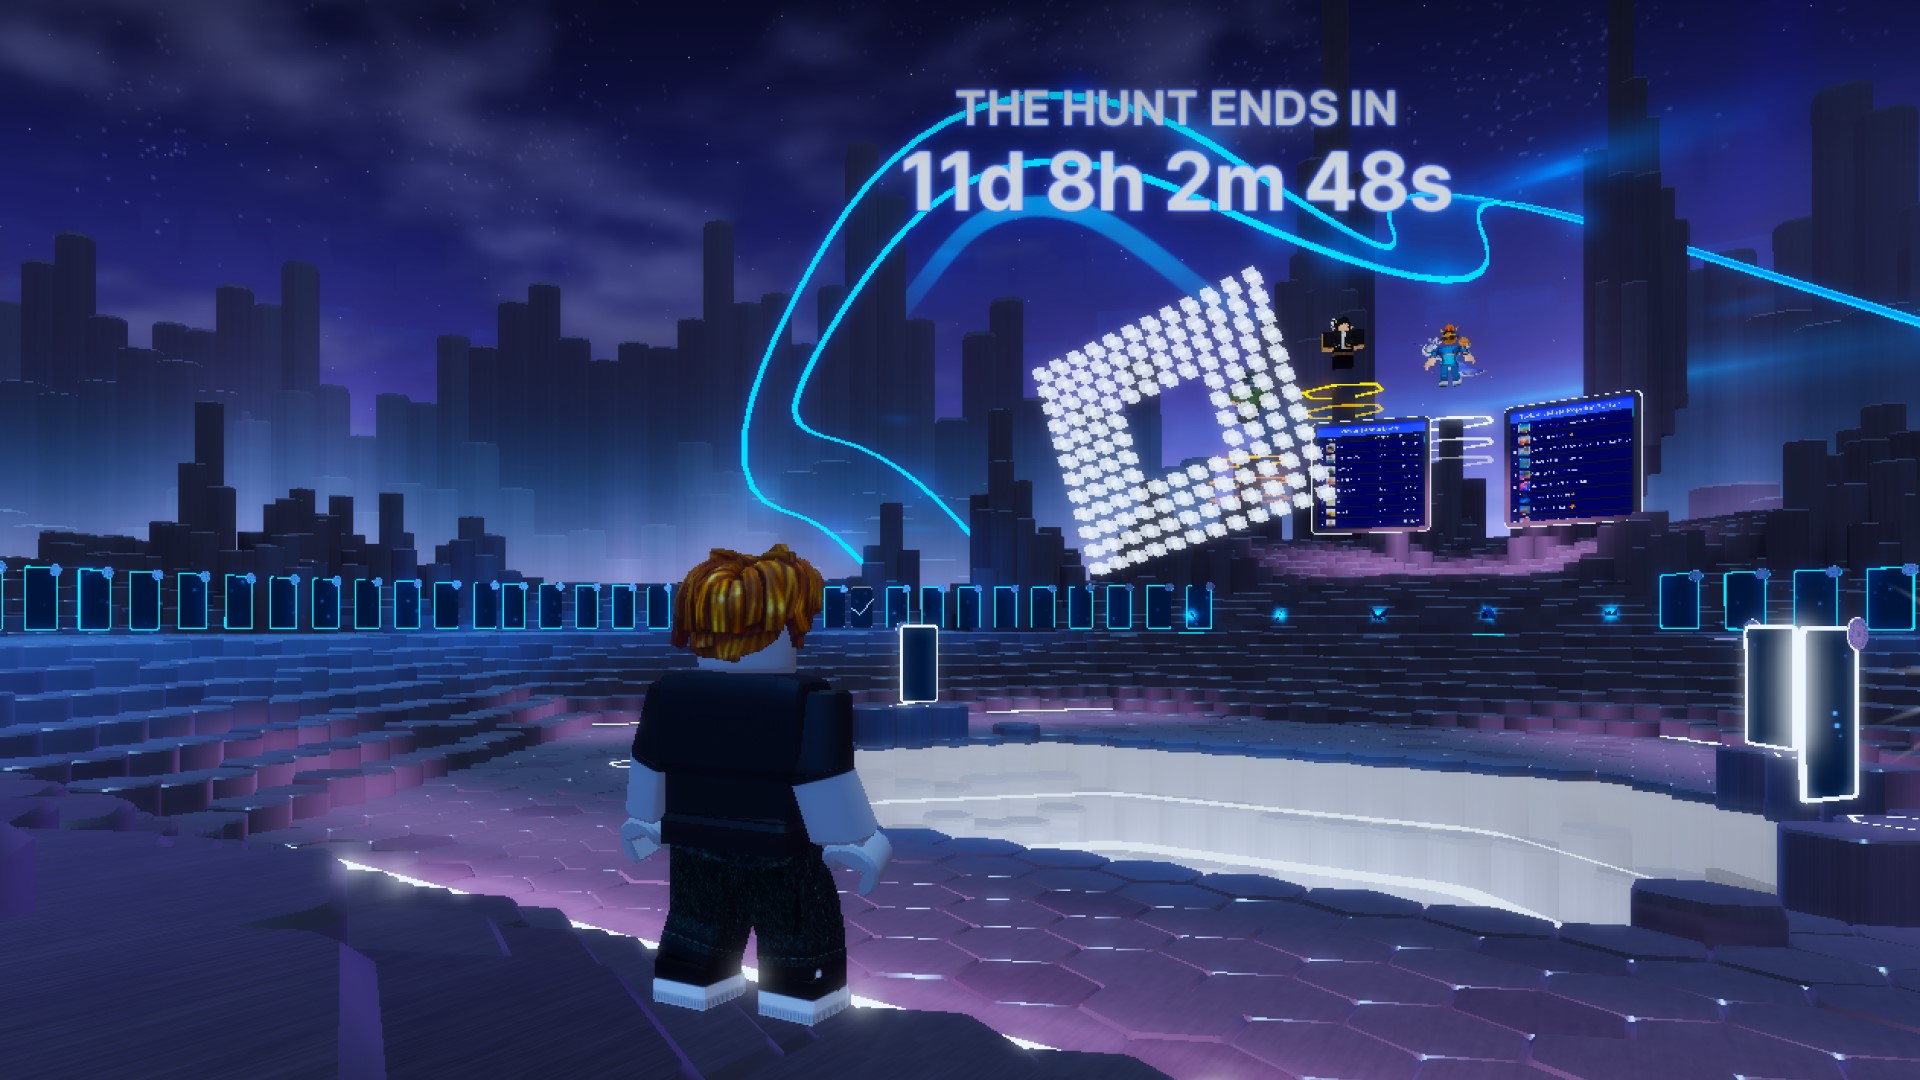 A character from Roblox game The Hunt standing in front of a large floating Roblox logo. In the background, a dark blue environment lined with doors.